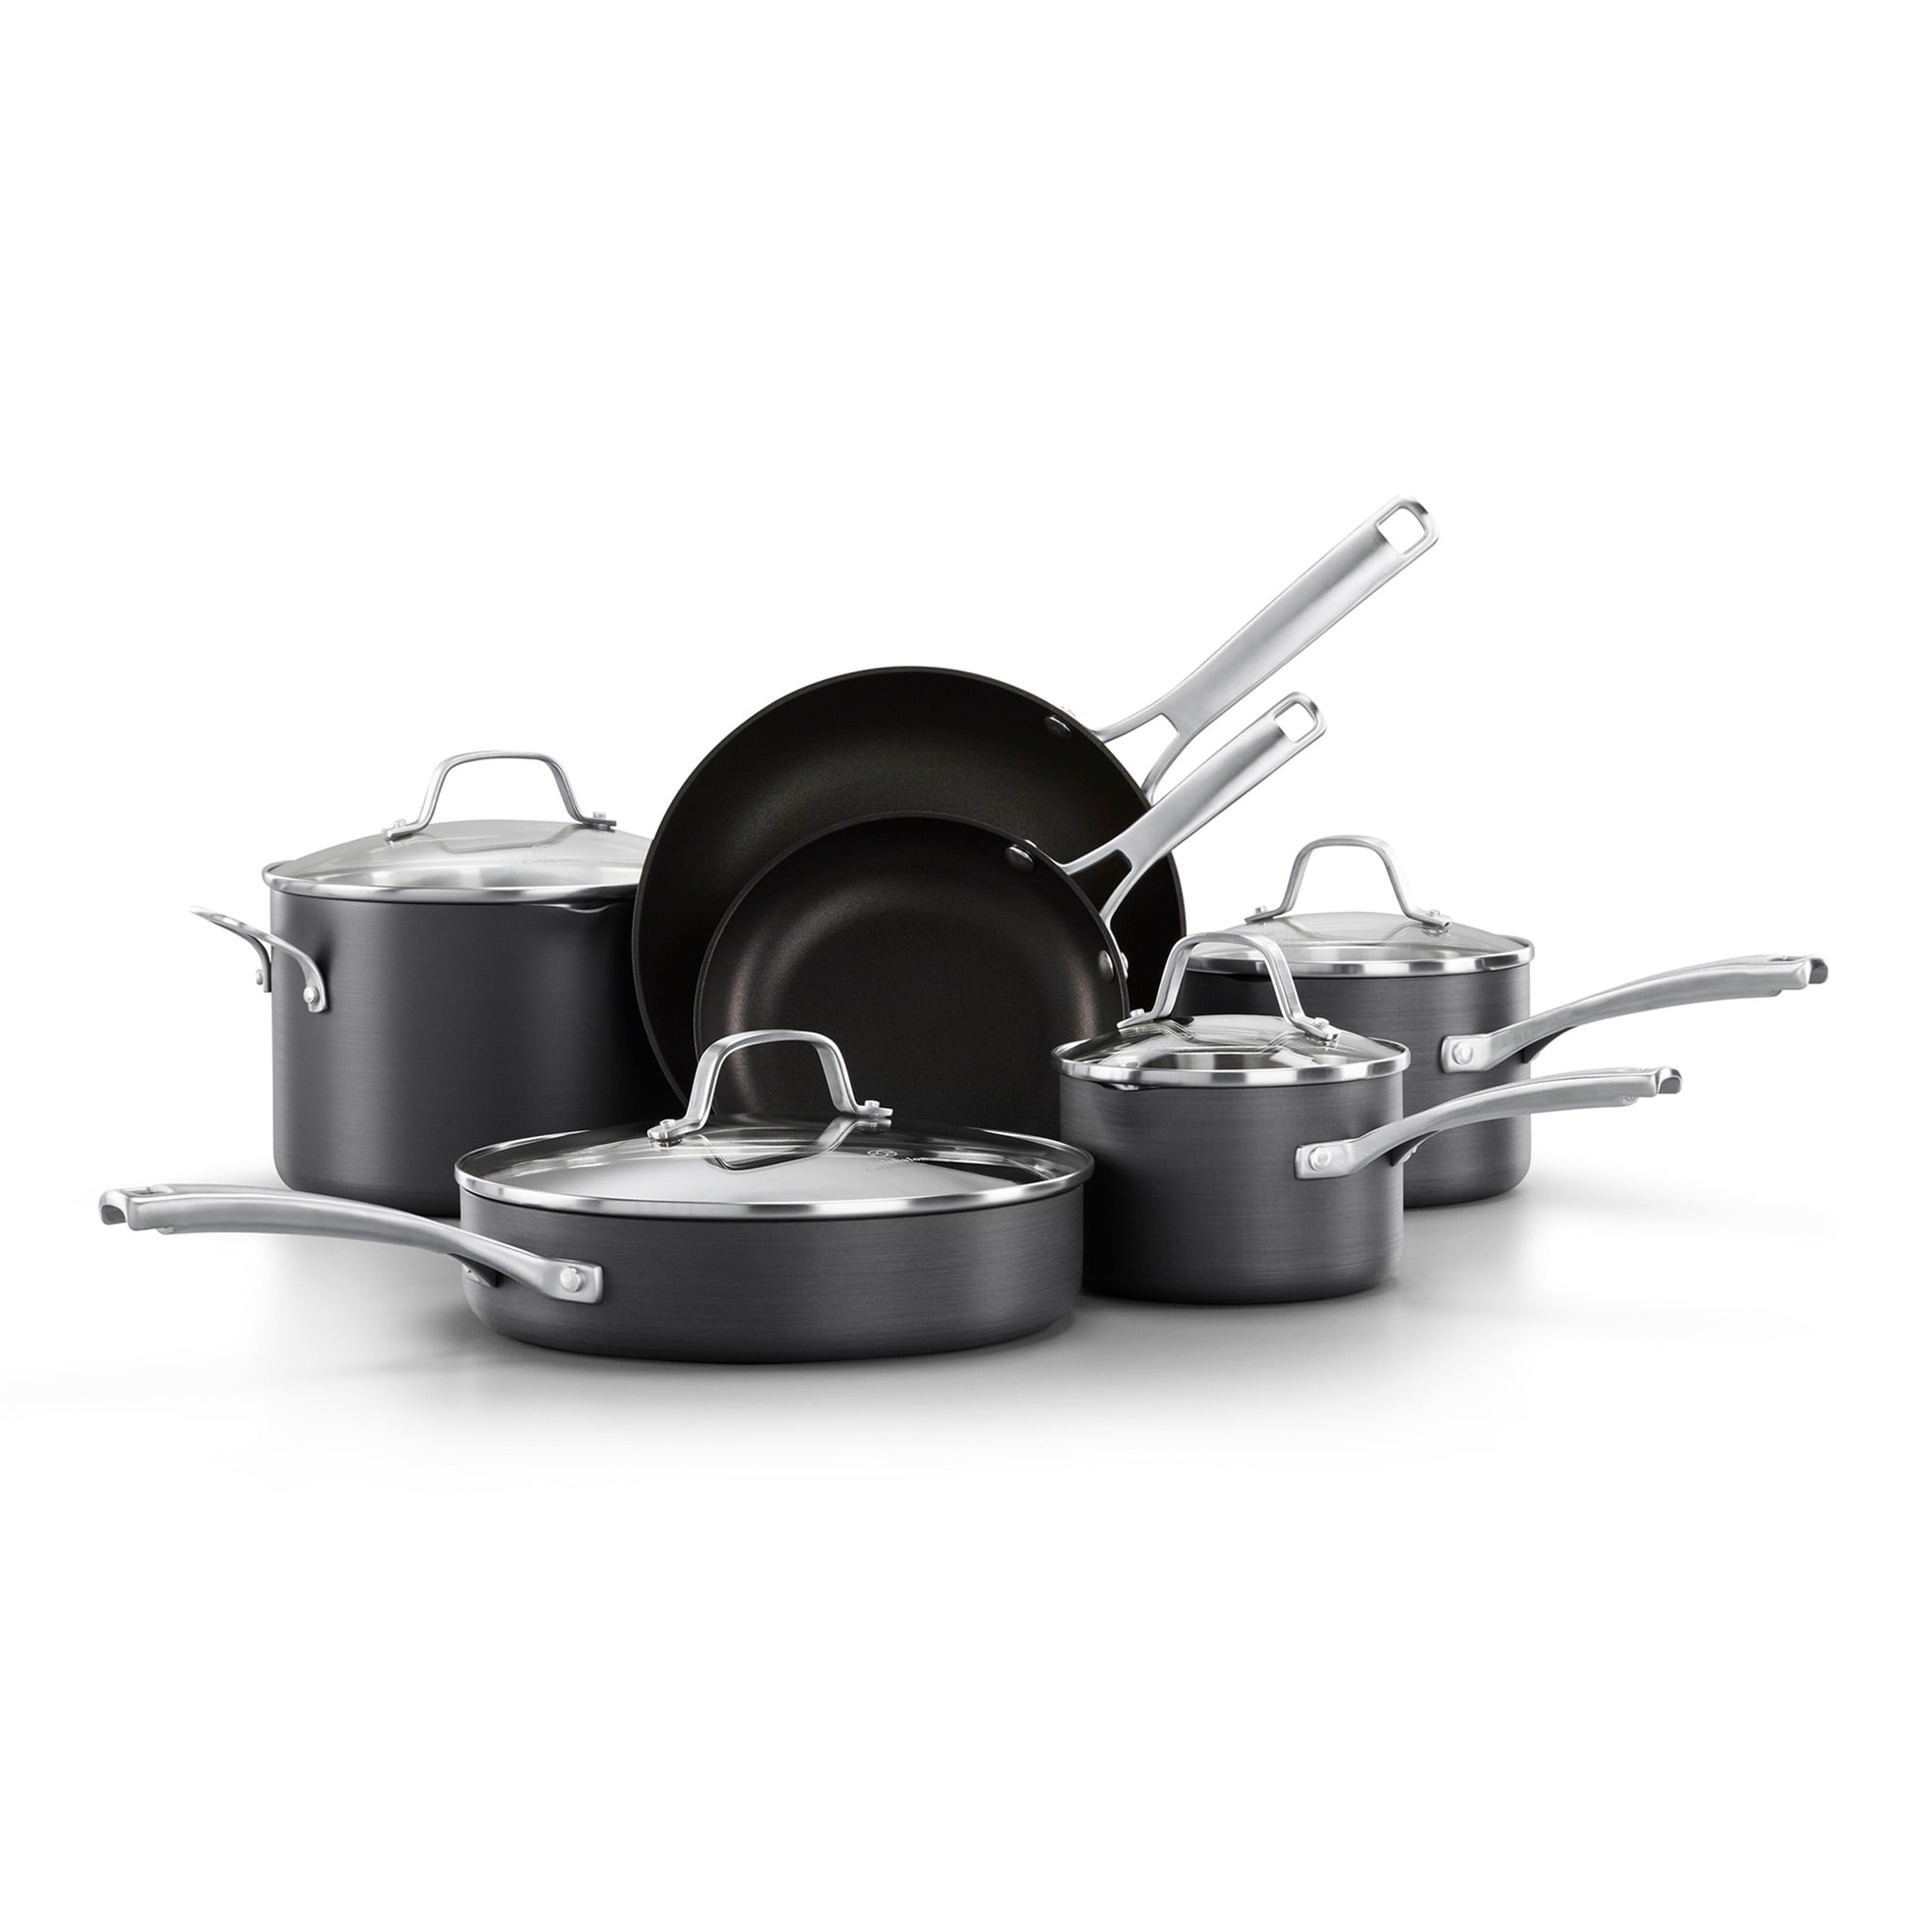 Caannasweis Pots and Pans Nonstick Cookware Sets Pot Set for Cooking Non Stick Pan with Lid 9530-A